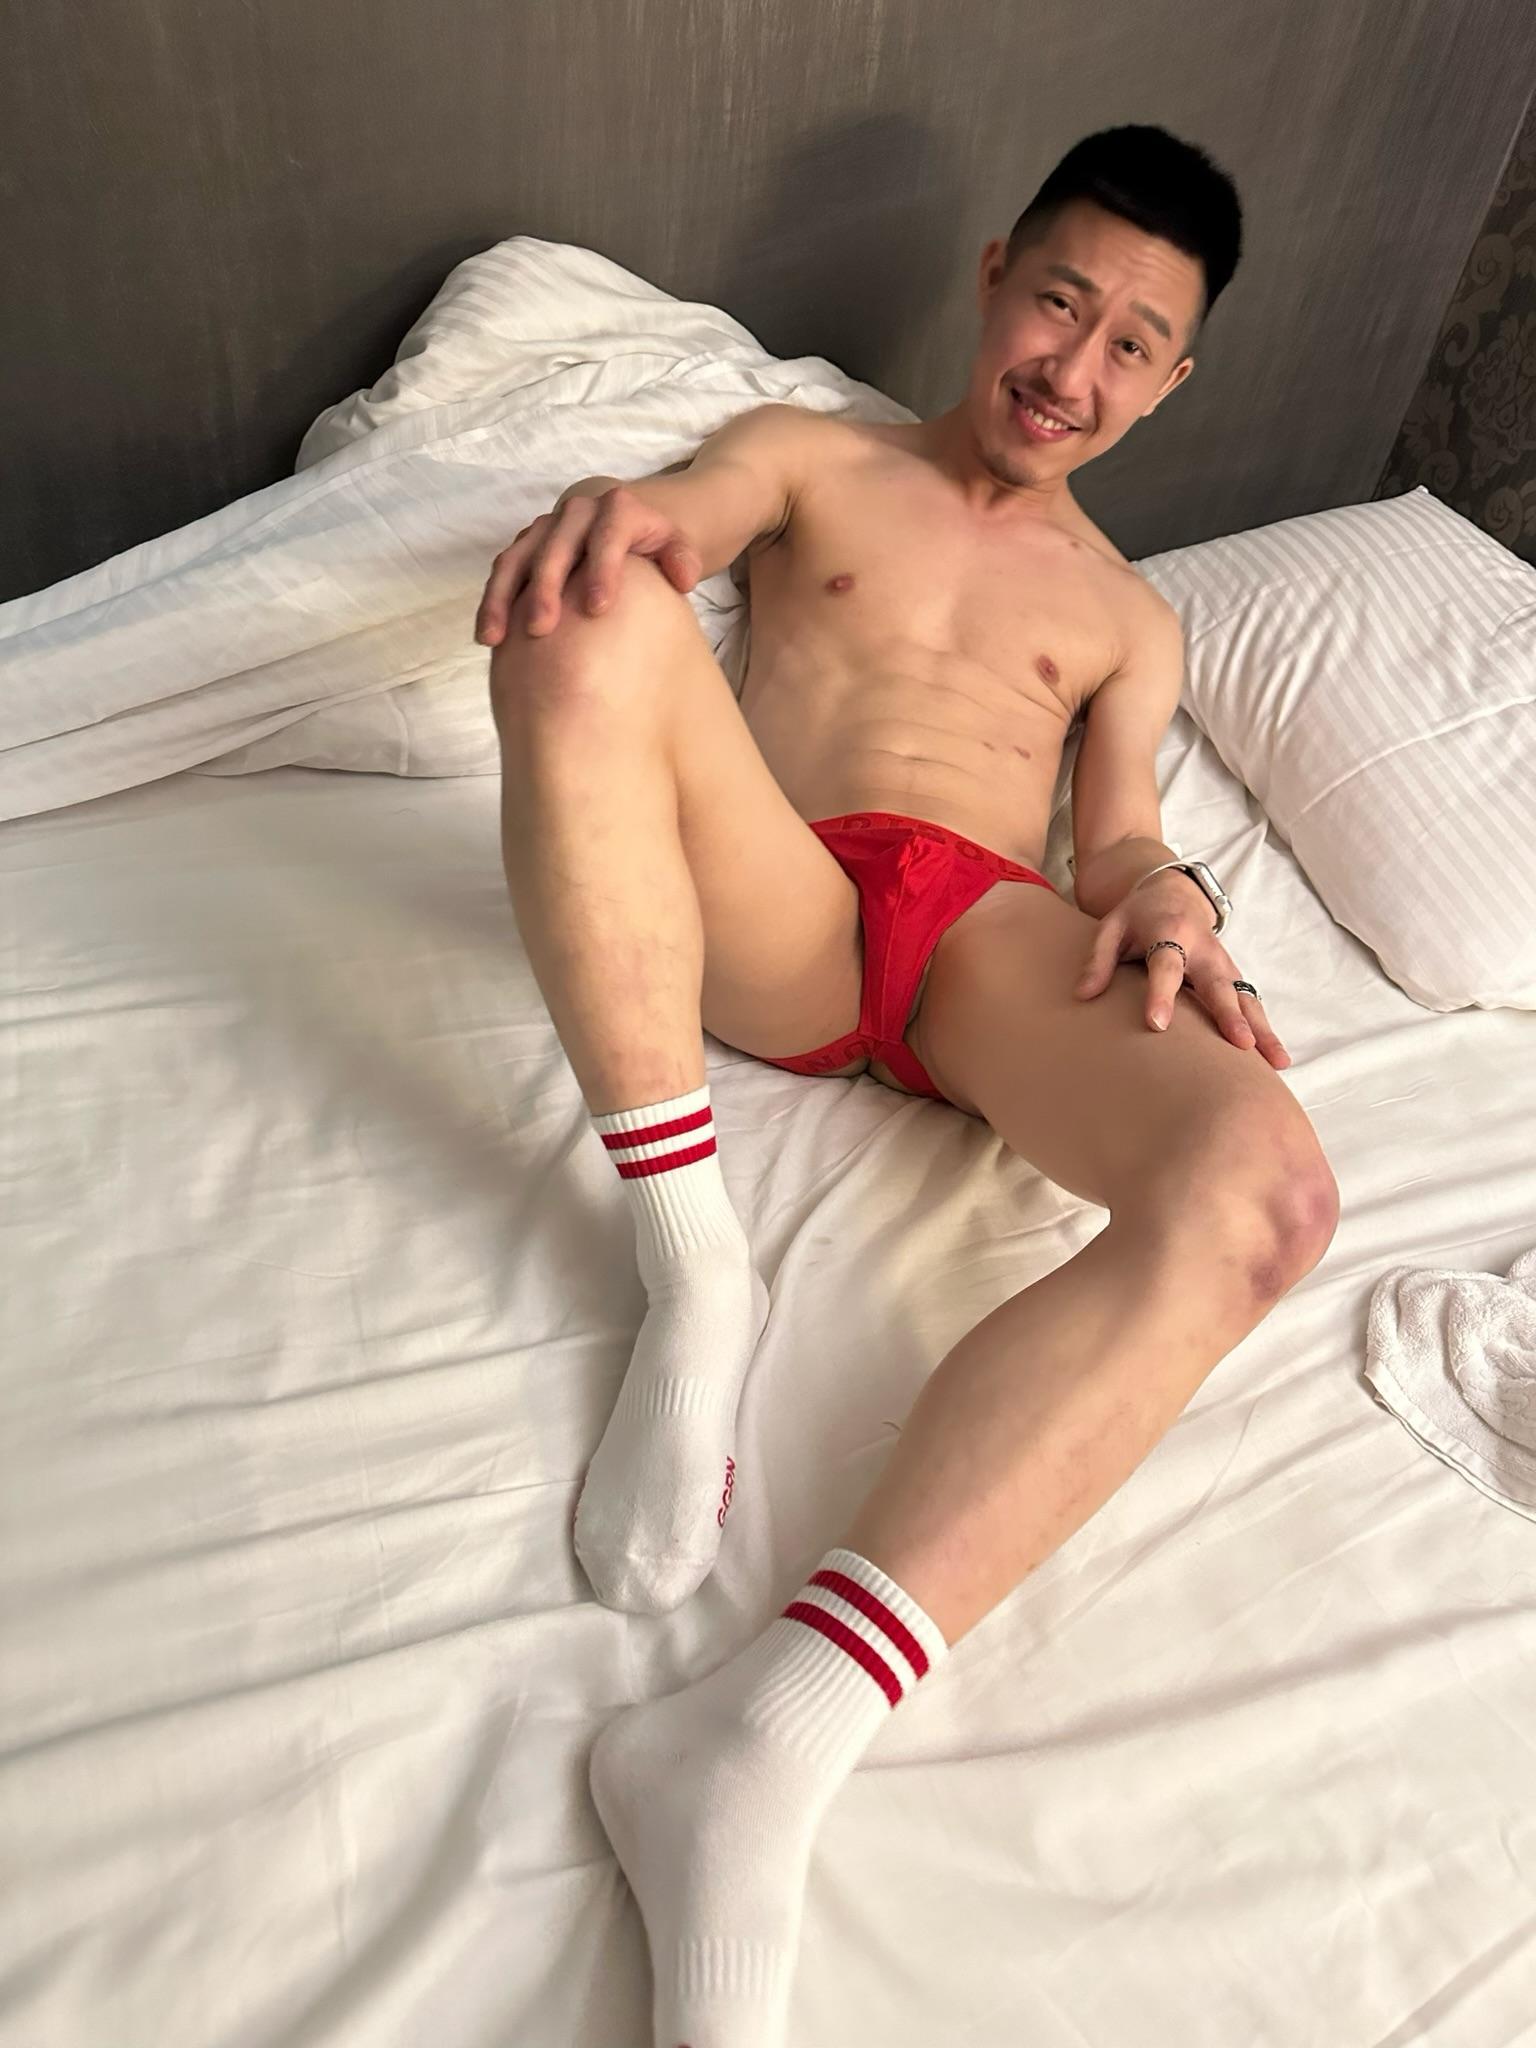 erotic roleplay chatroom TaichungFredBTM